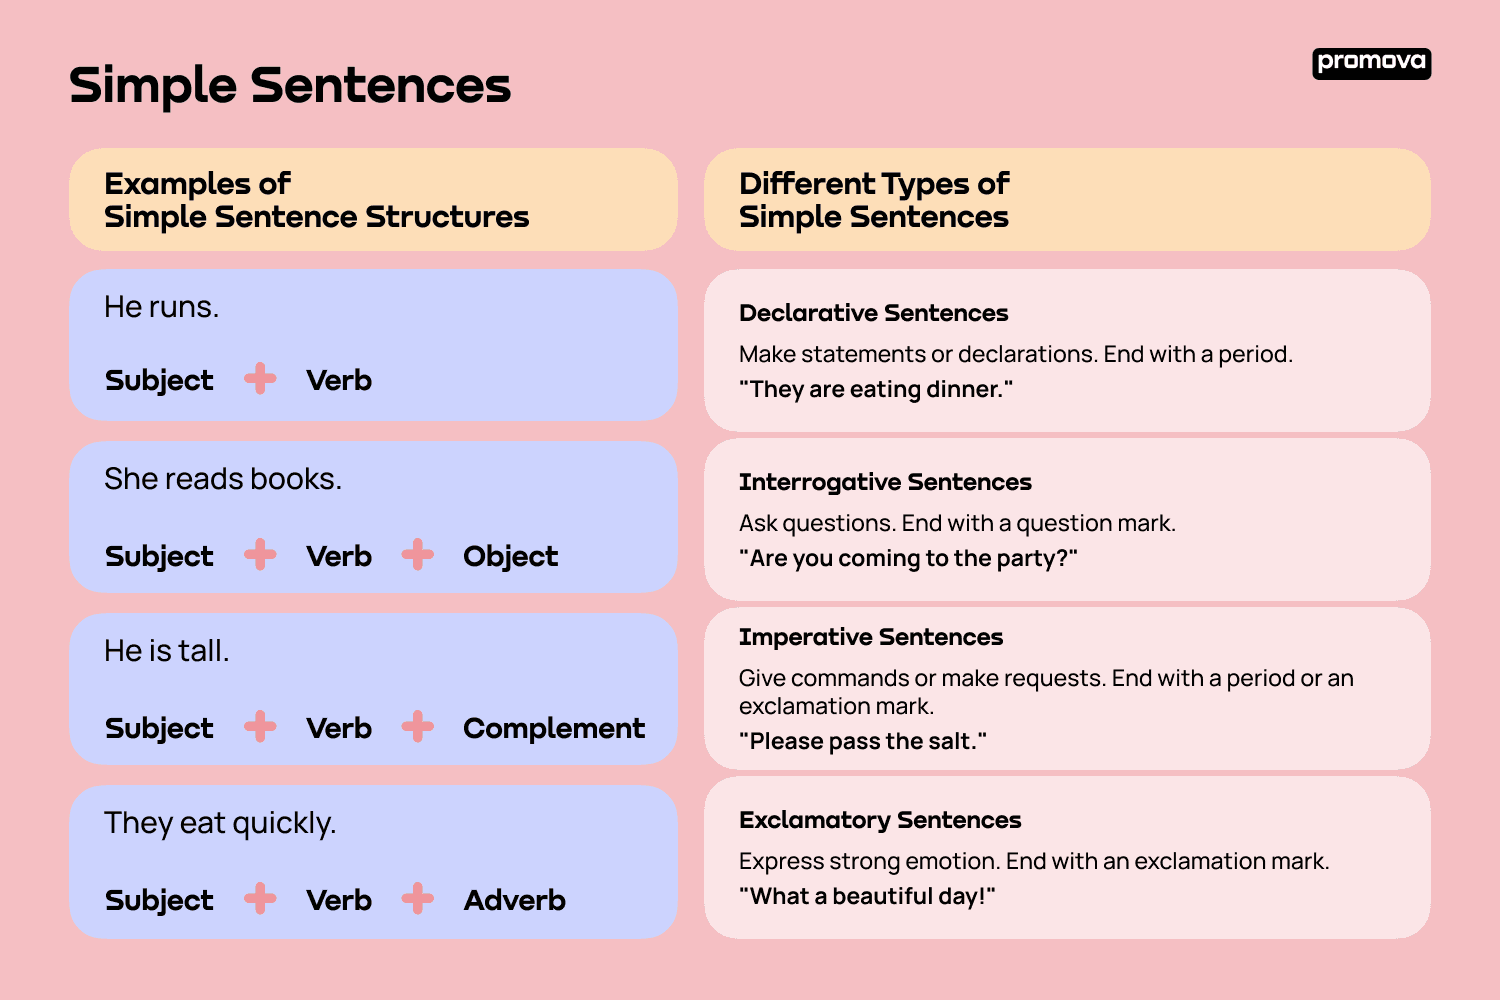 Examples of Simple Sentence Structures